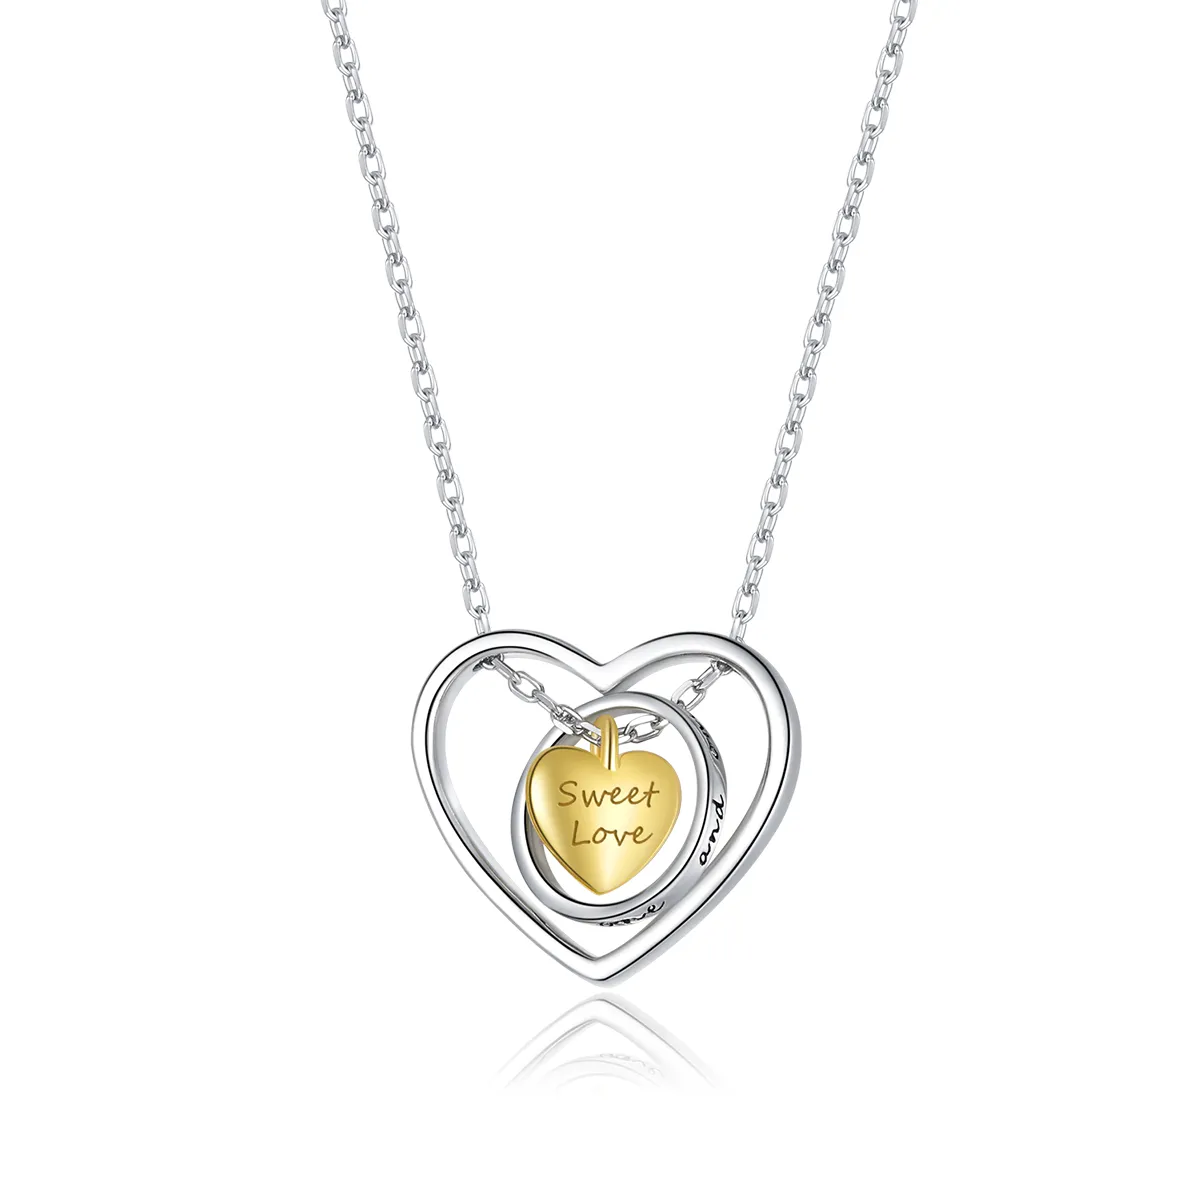 Pandora Style Surrounded by Heart Necklace - BSN207